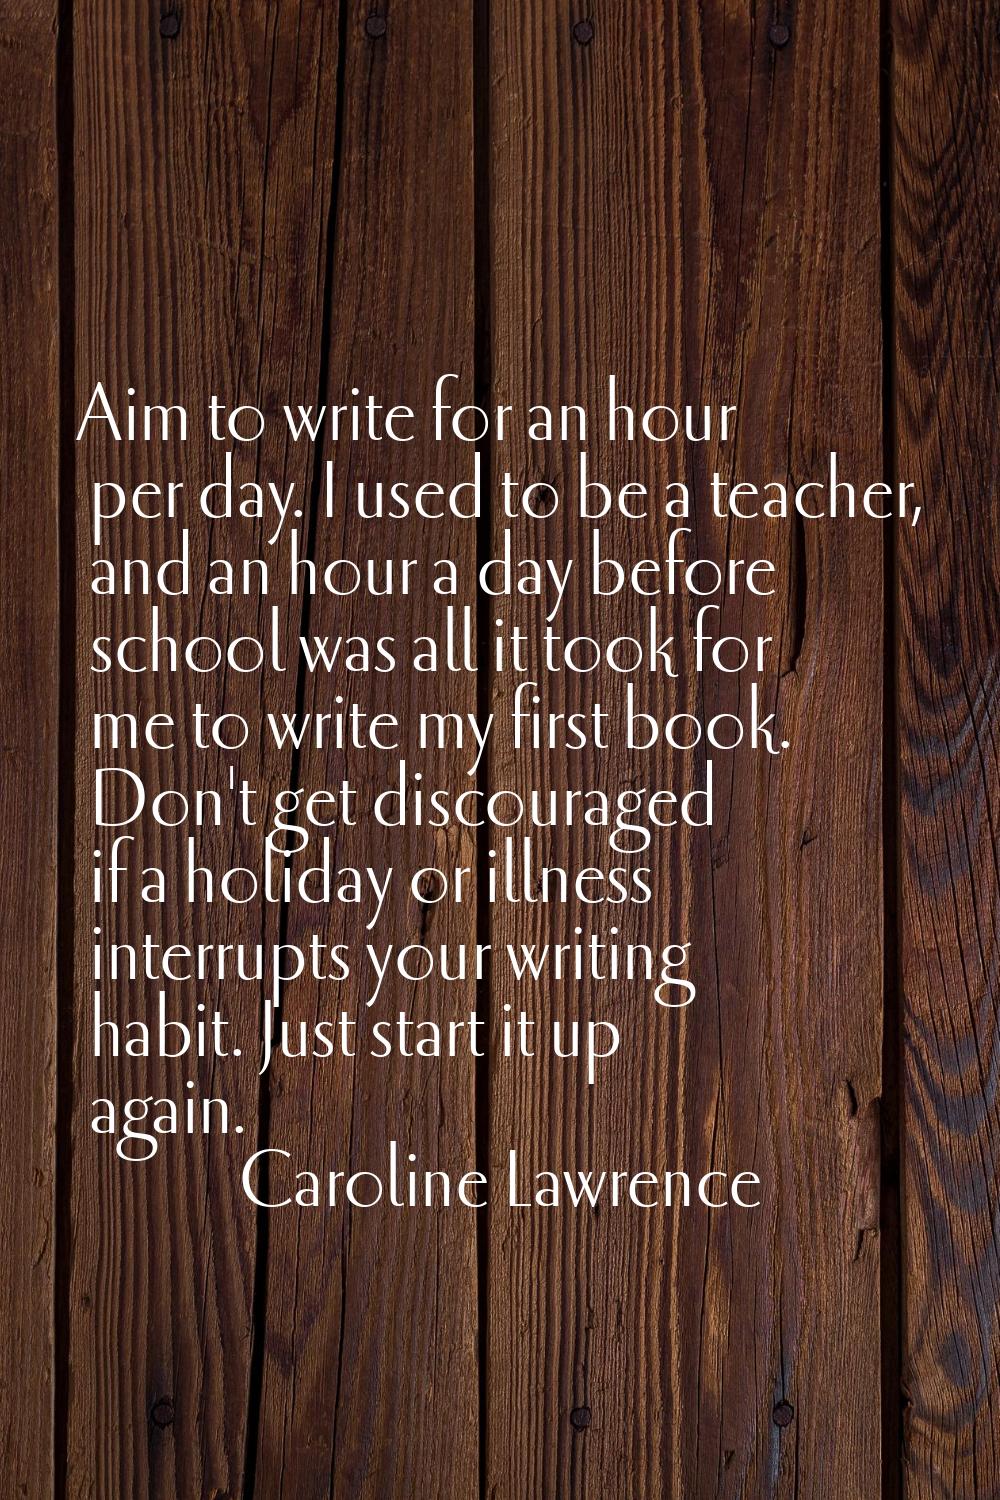 Aim to write for an hour per day. I used to be a teacher, and an hour a day before school was all i